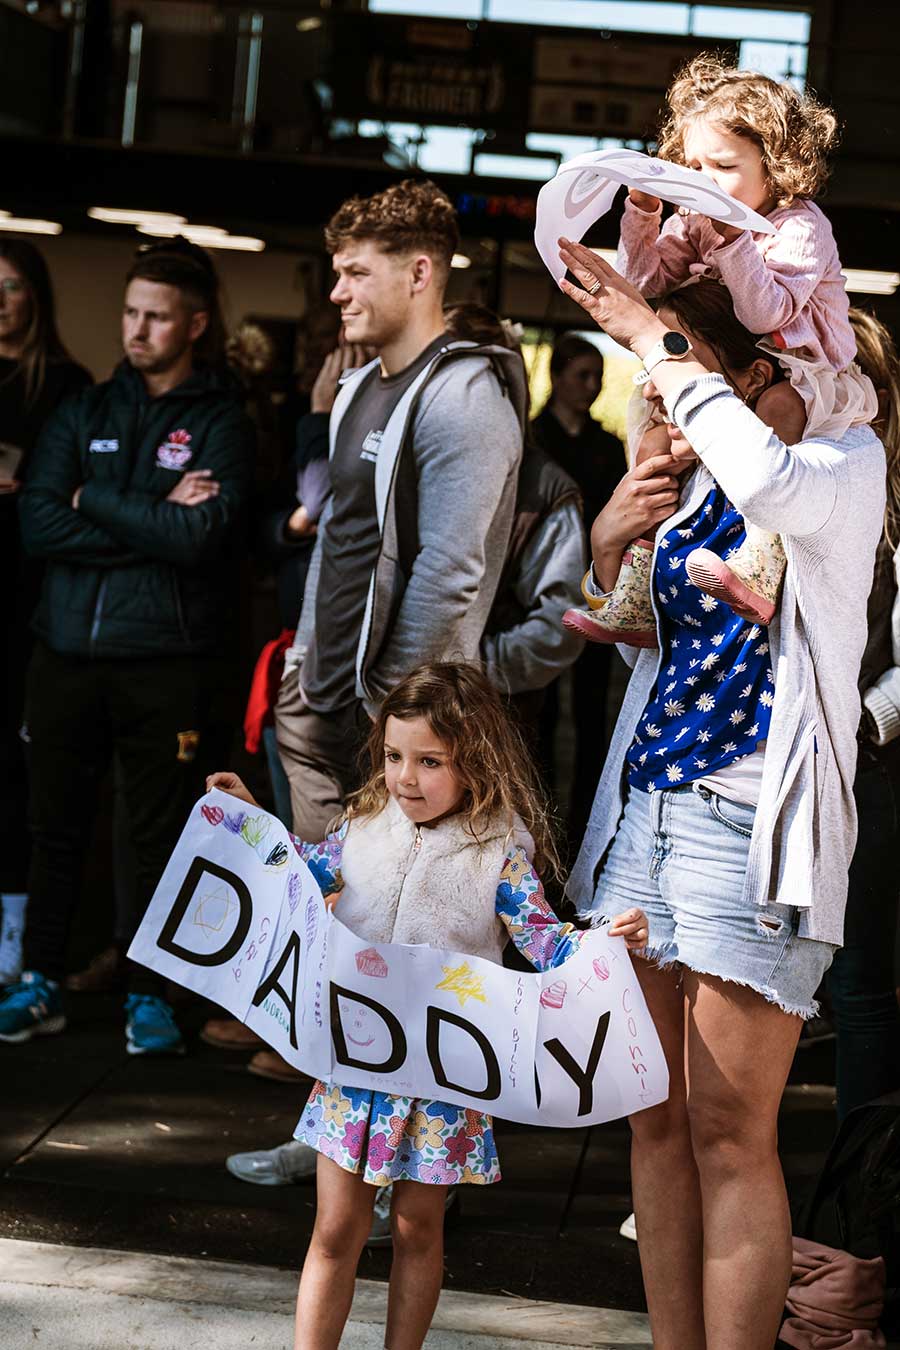 Young girl with "Daddy" banner